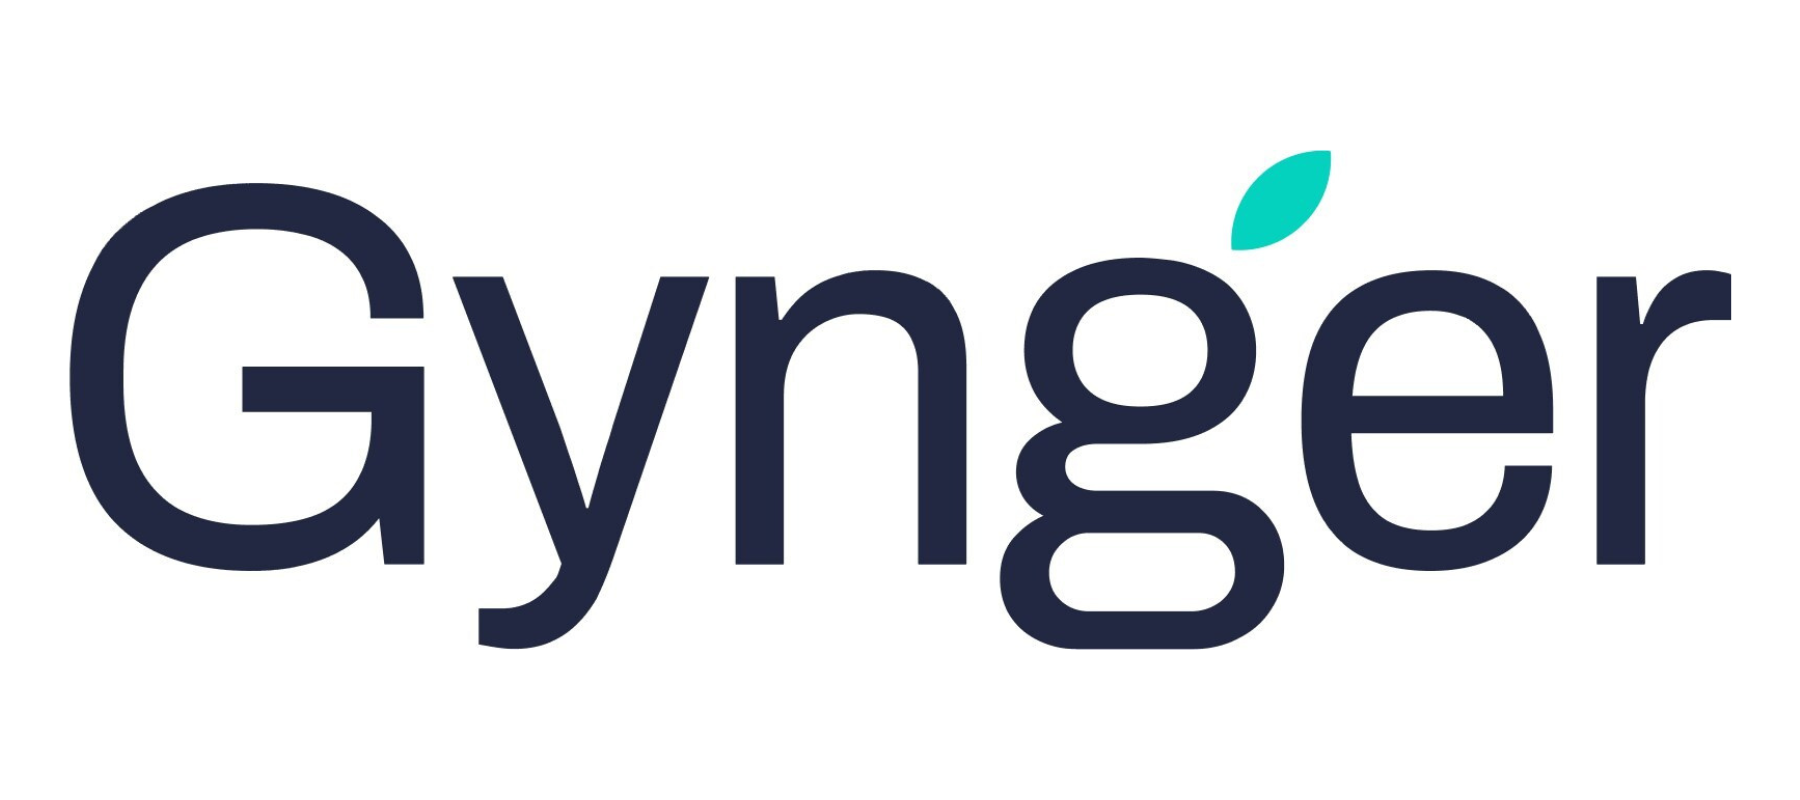 Gynger secures $20m funding to revolutionize corporate technology purchasing